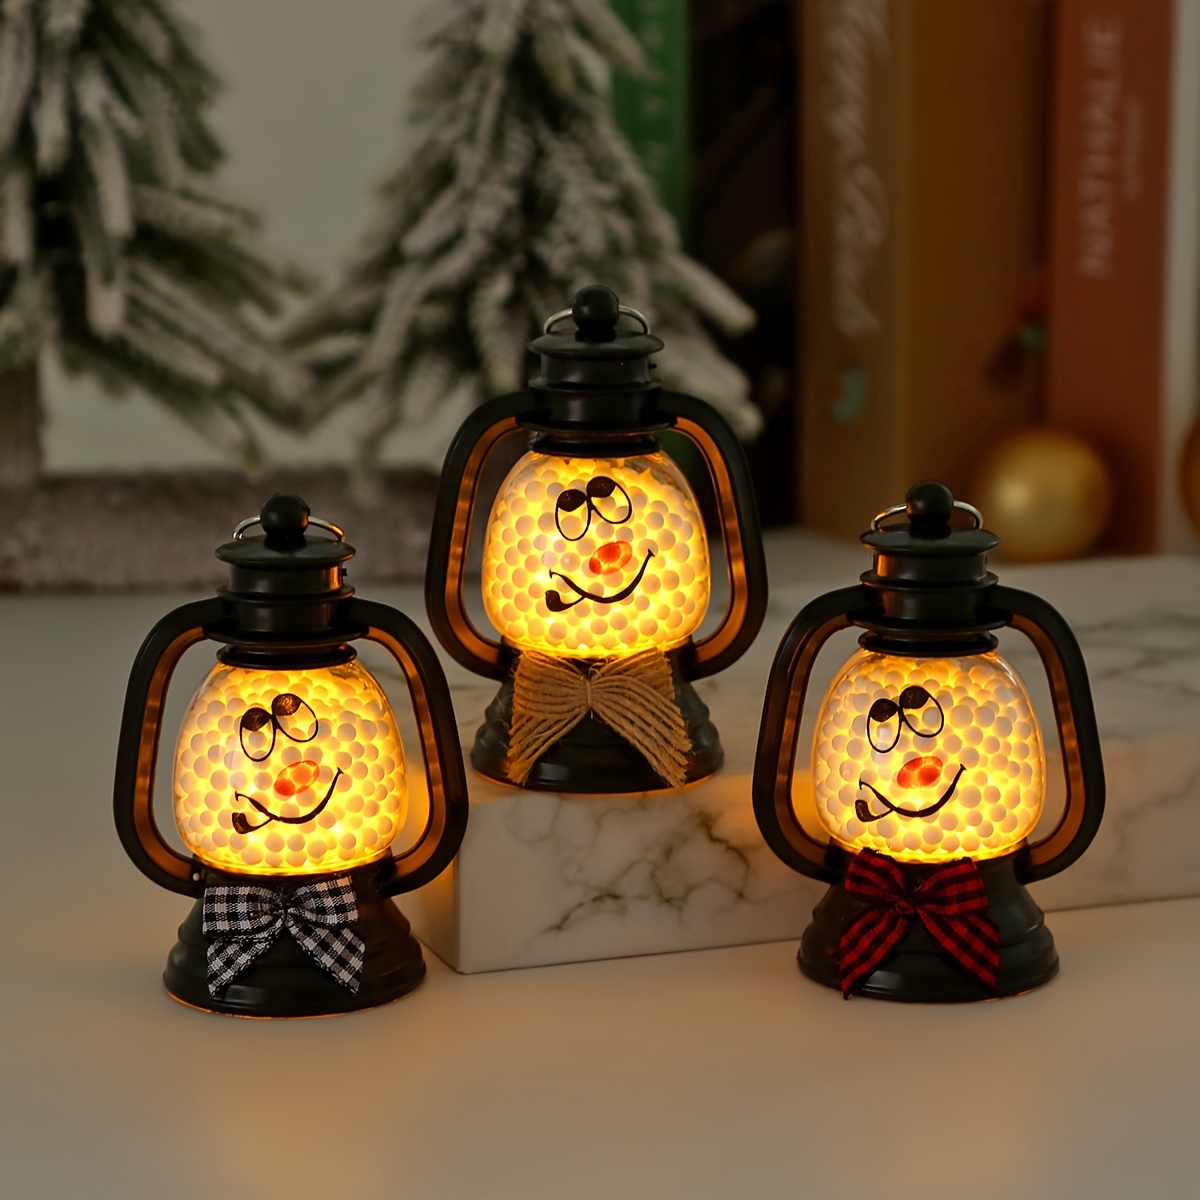 12pcs Halloween Mini Lantern Decorative With LED Candle Bulk 4 In Small  Hanging Lantern, Table Centerpiece Portable Vintage Lantern Ornament, For  West